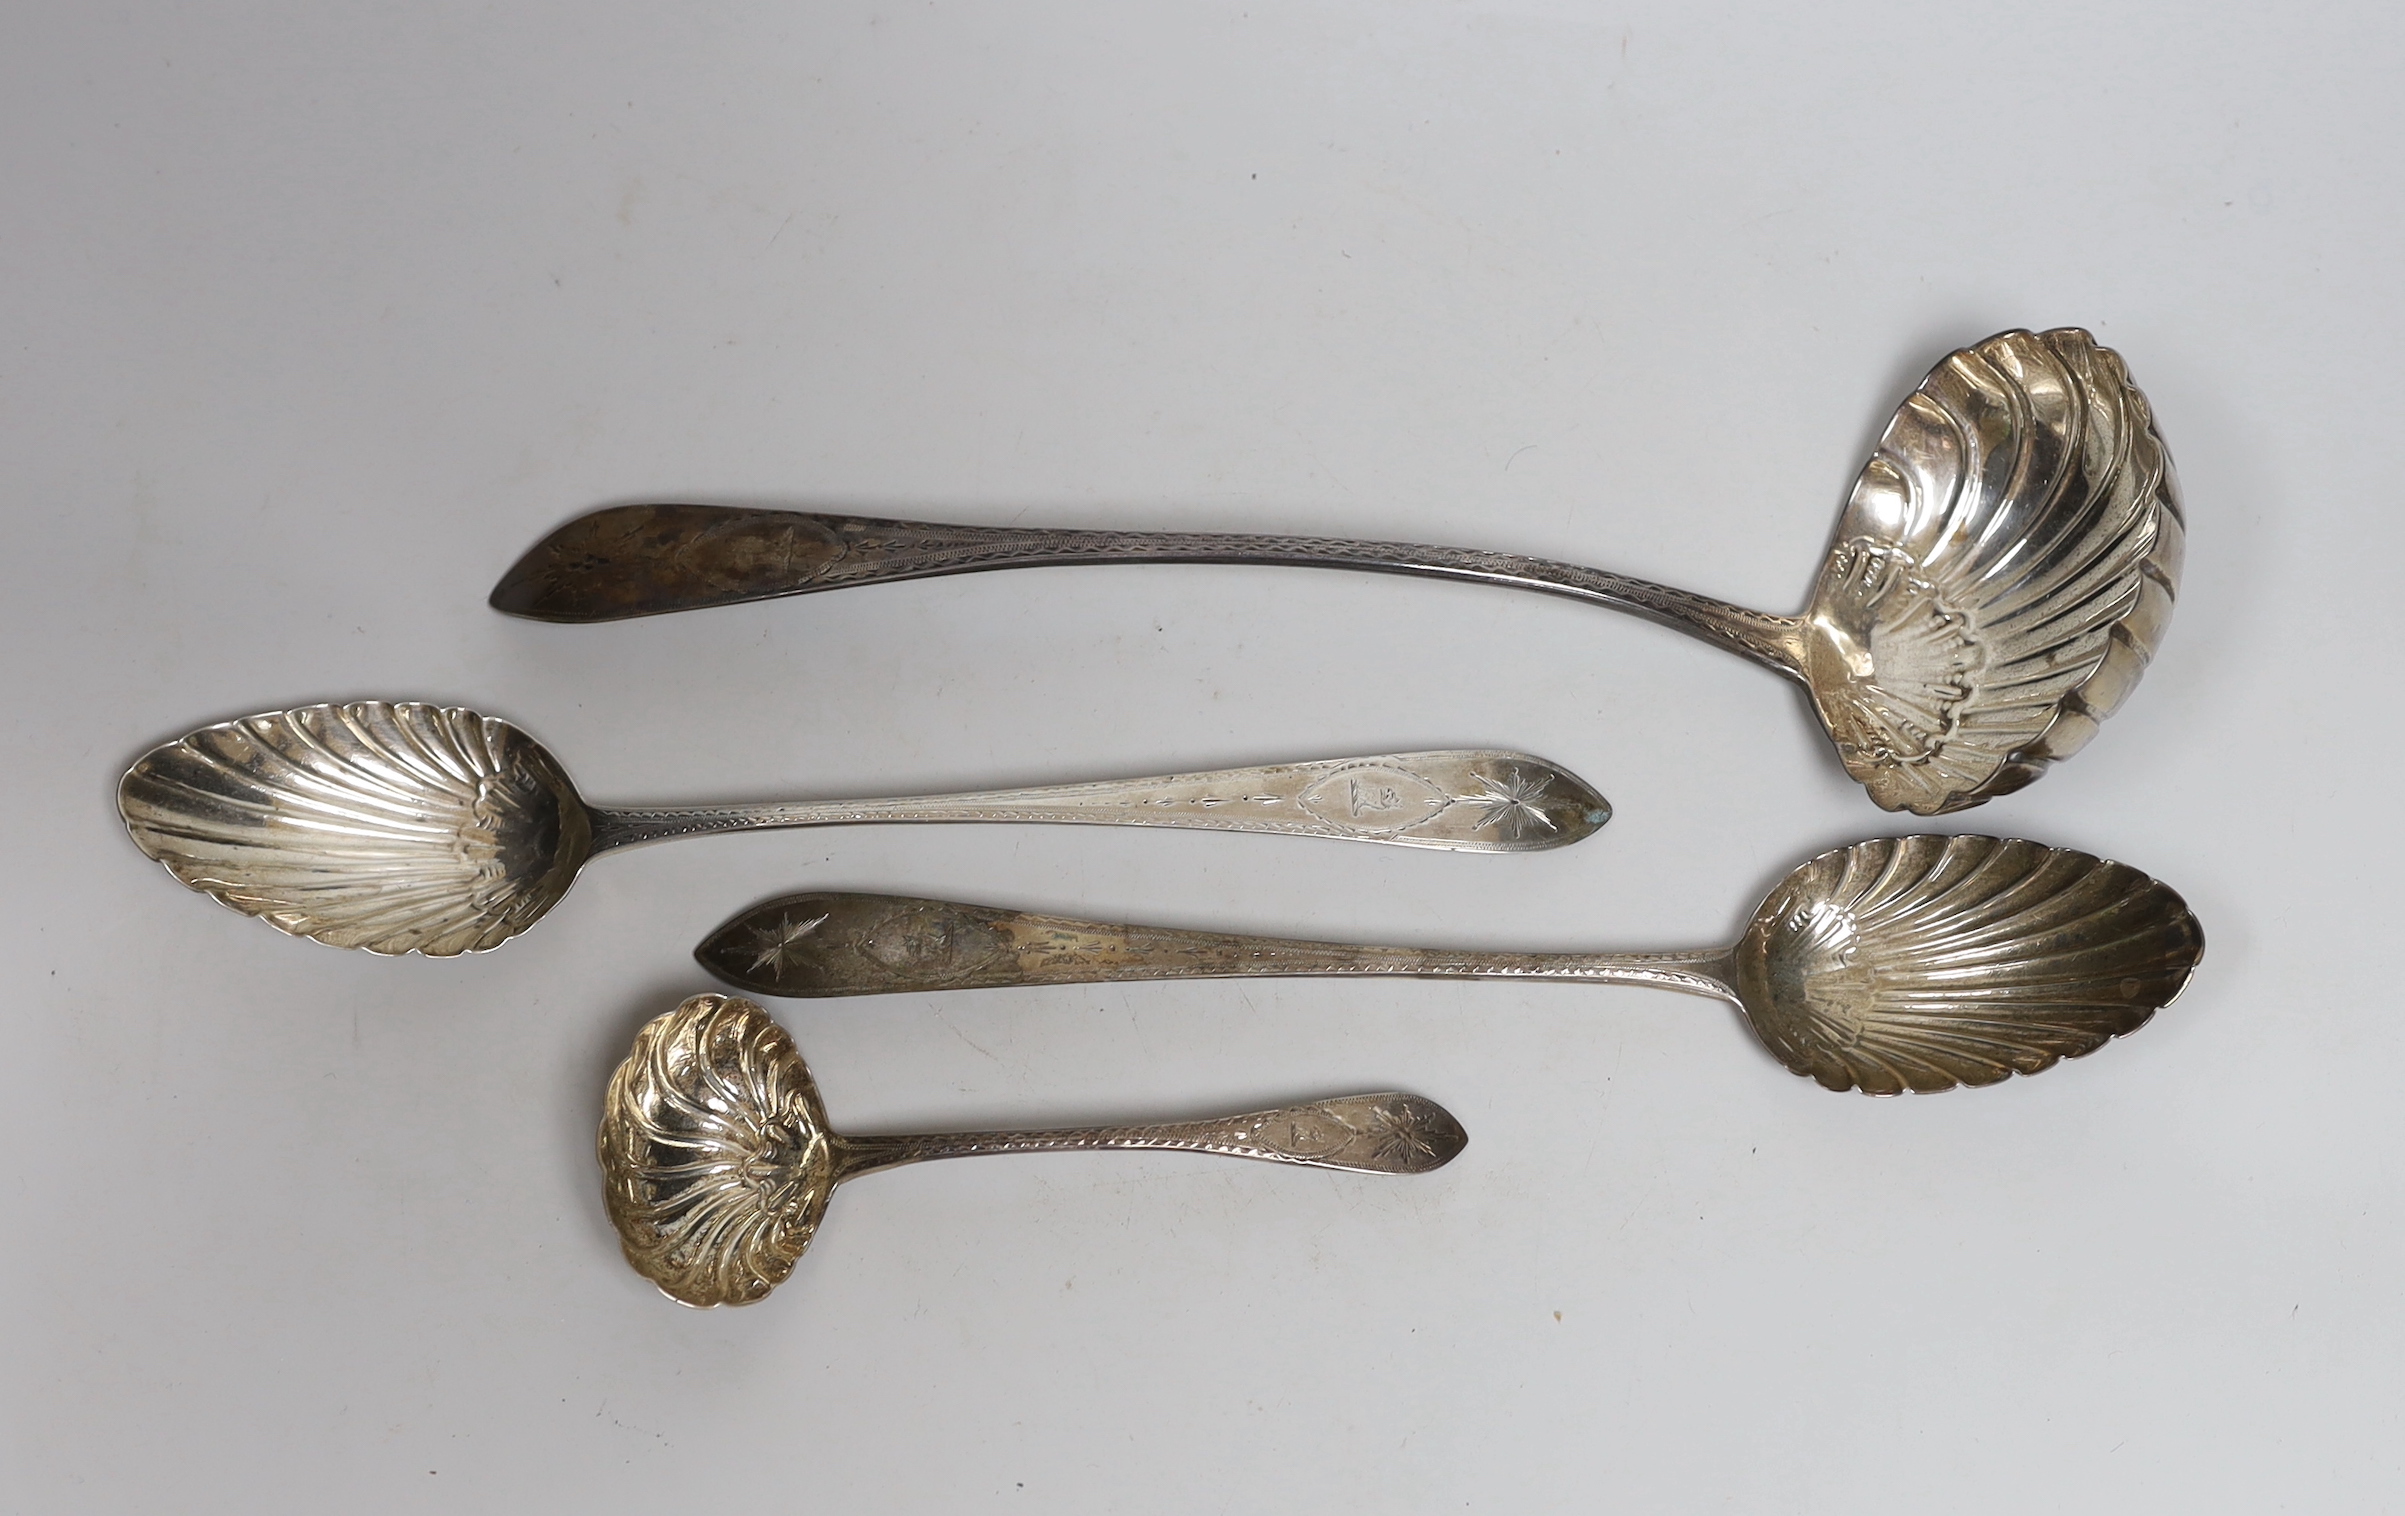 A George IV silver bright cut engraved soup ladle, with fluted bowl, Lawrence Nolan, Dublin, 1827, 34.5cm, a pair of George III Irish silver basting spoons, Michael Keating, Dublin circa 179o and an Irish silver sauce la